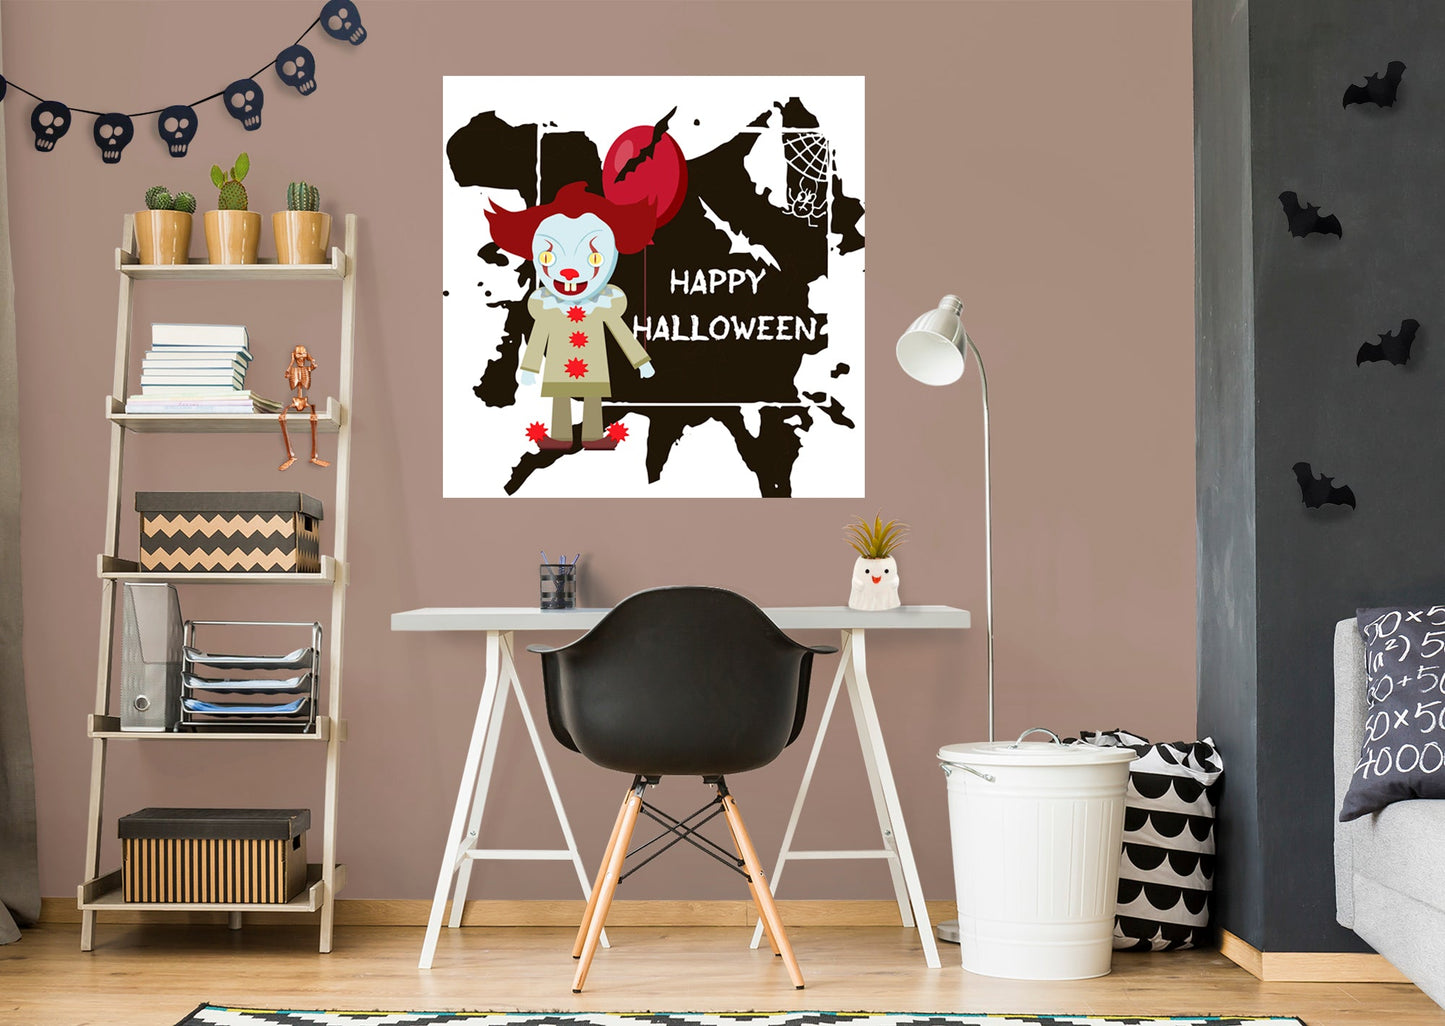 Halloween: The Red Balloon Mural        -   Removable Wall   Adhesive Decal